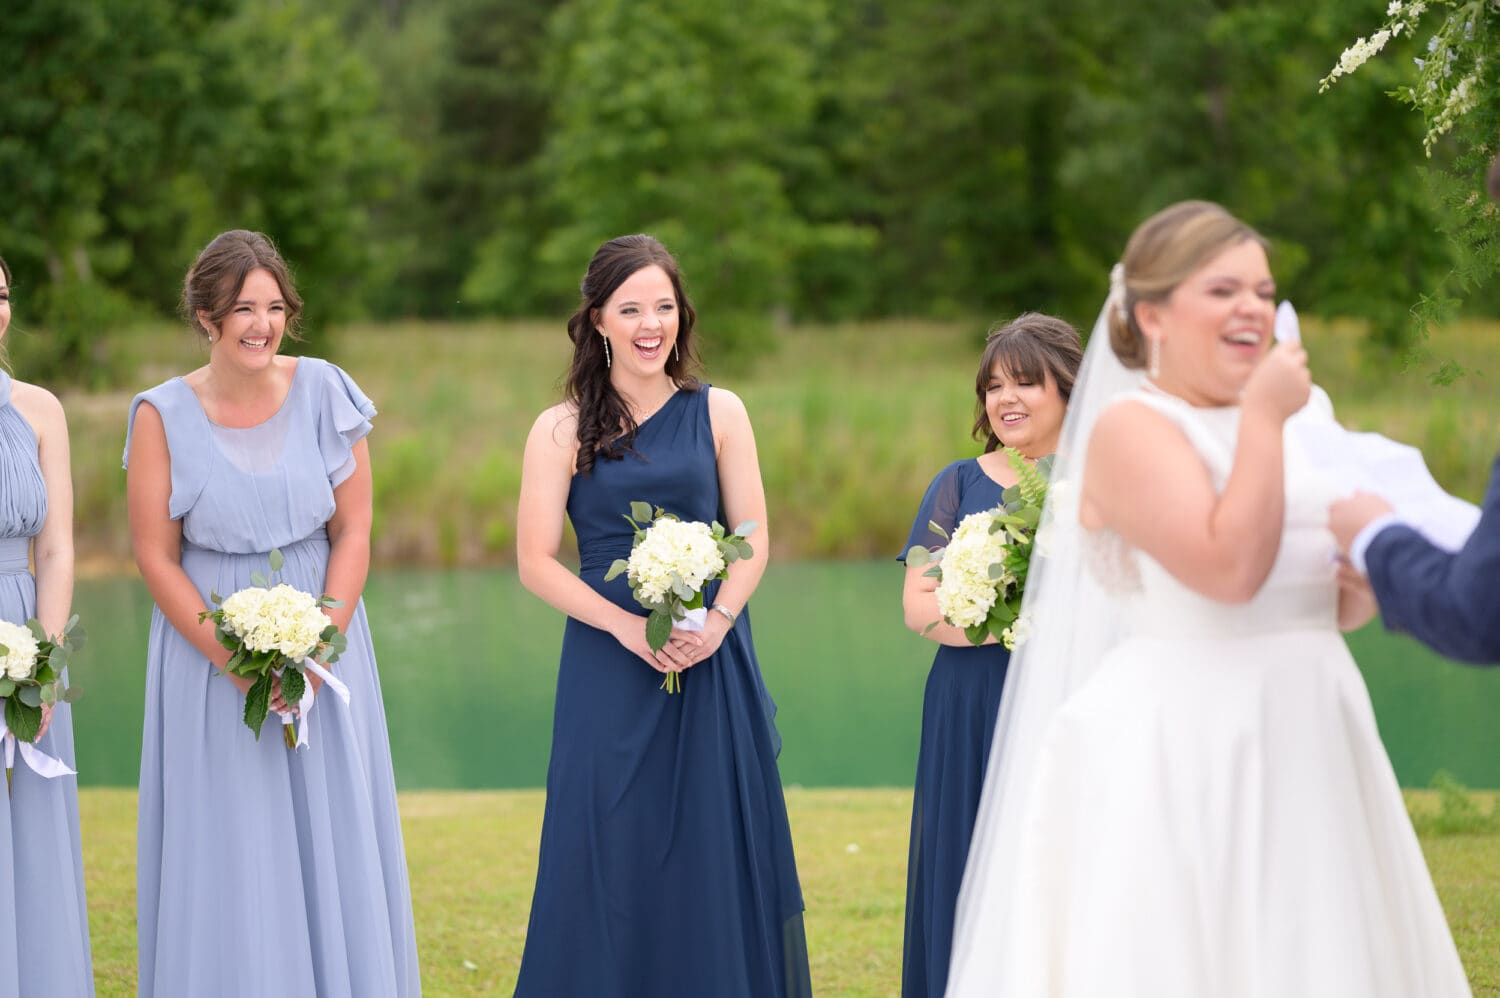 Bridesmaids laughing during the ceremony - The Venue at White Oaks Farm